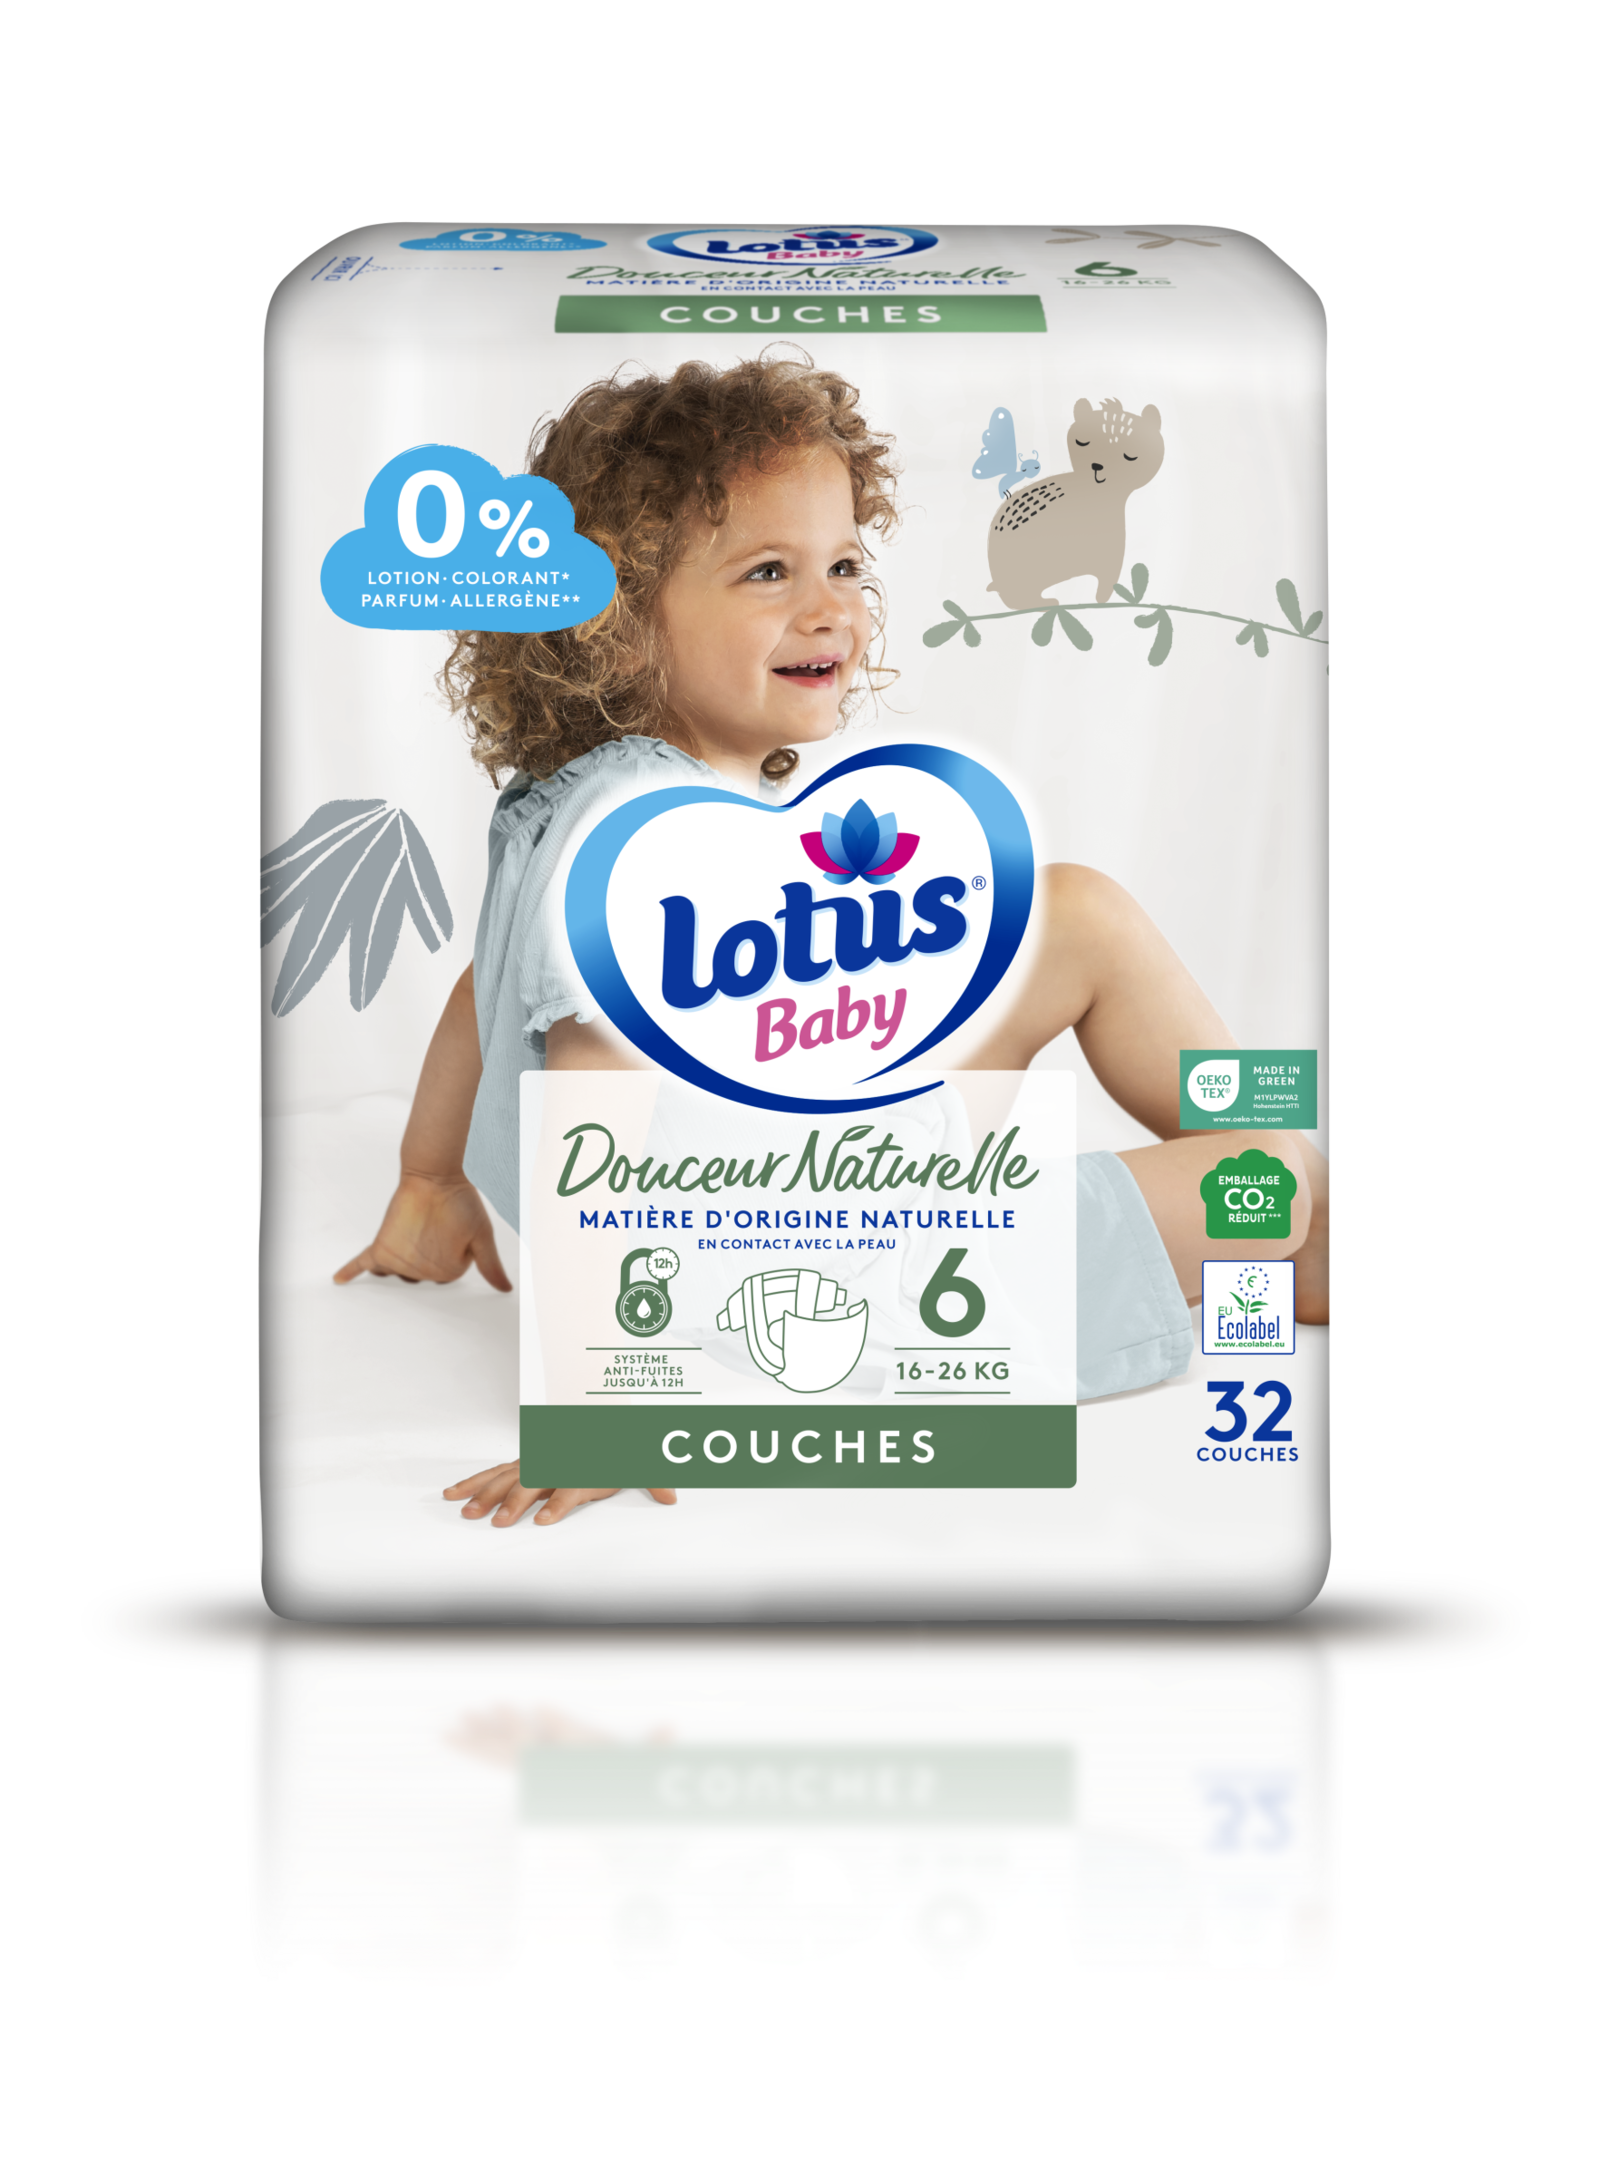 Lotus Baby Natural Touch Culottes Taille 6 (16-26Kg) x34 (lot de 2 soit 68  couches)